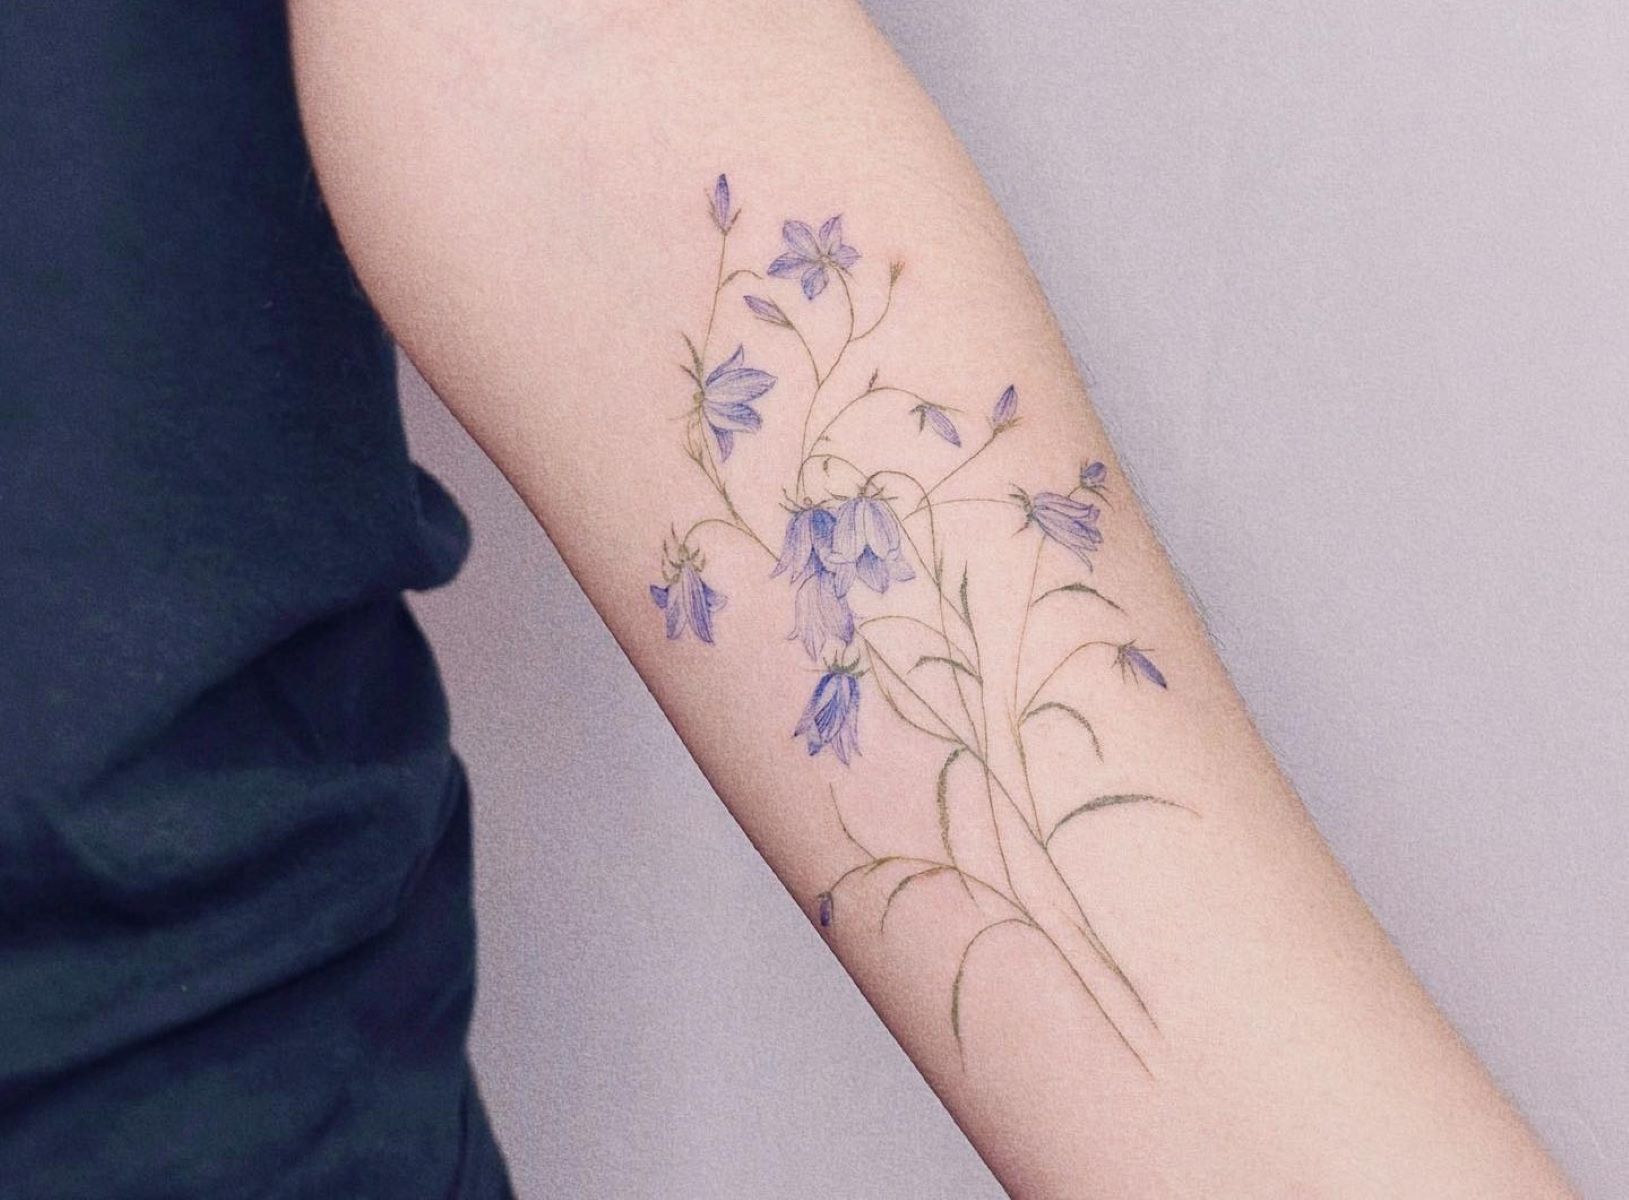 10 Stunning Flower Tattoo Designs You Need To See